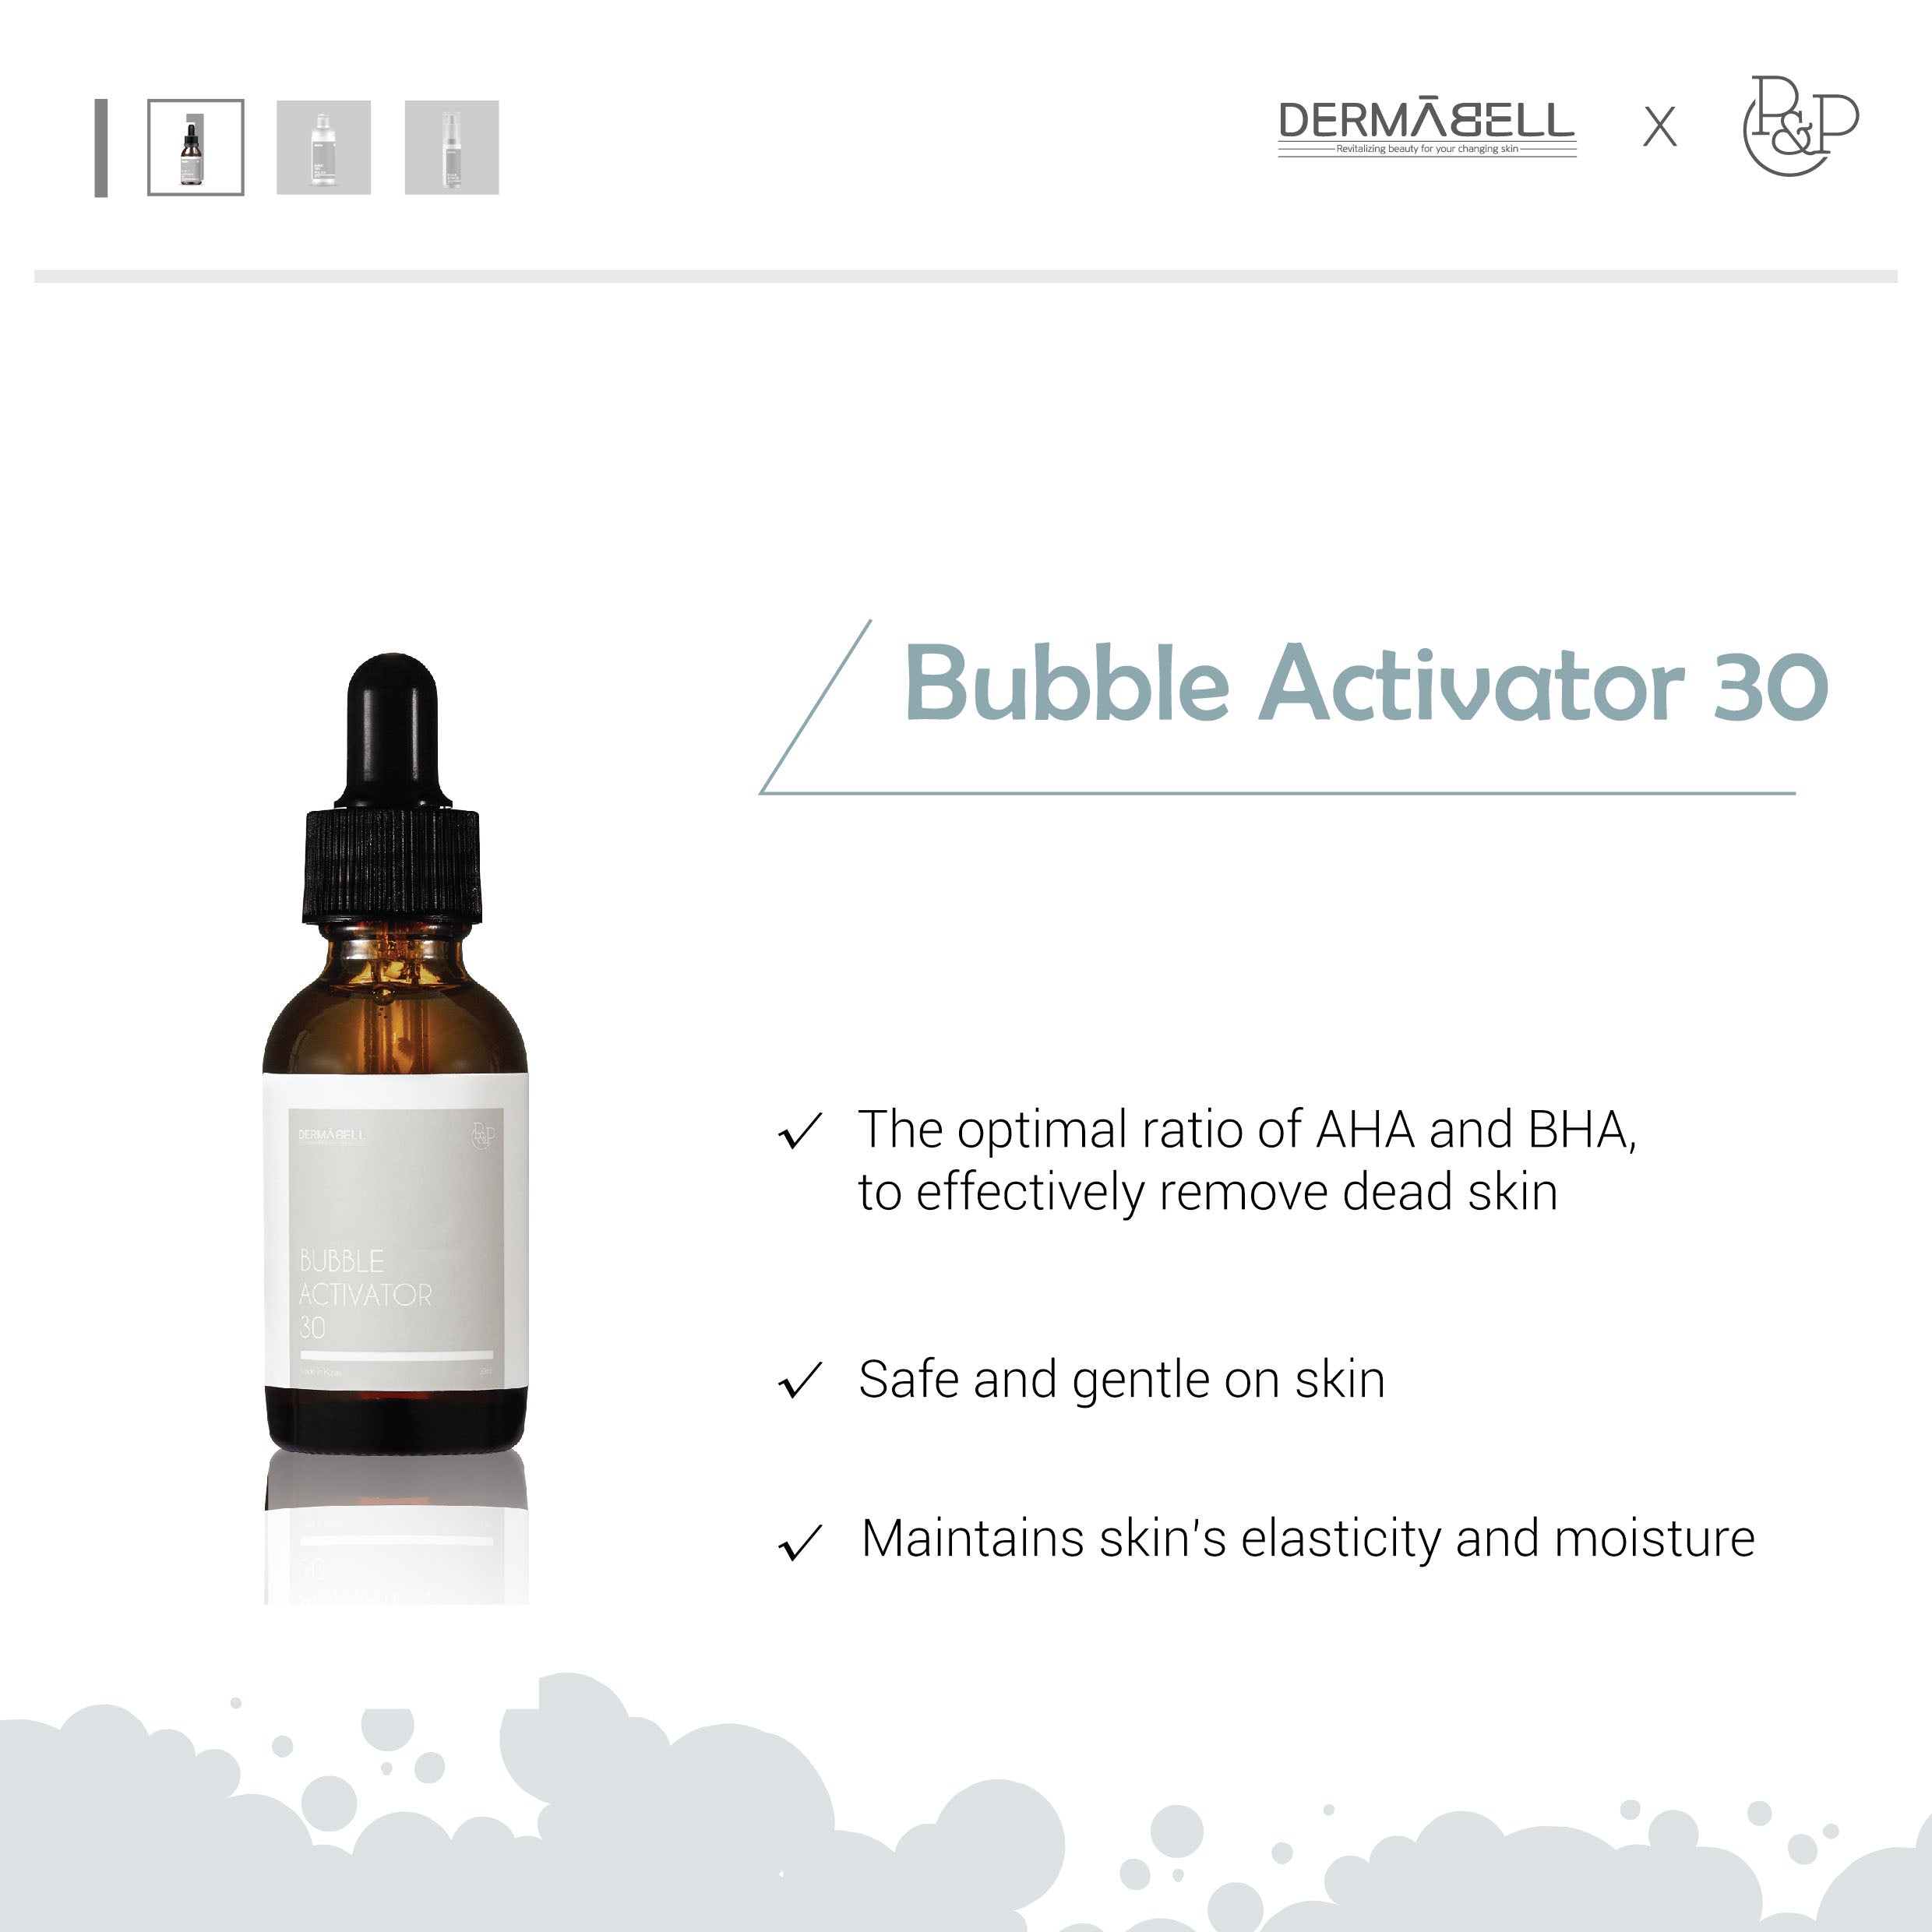 Bubble Peel Therapy Set Dermabell Therapy by DERMABELL PRO THERAPY. Kbeauty. Skincare. Cosmeceutical. Cosmetics. Singapore. Malaysia. Dermatologist. 